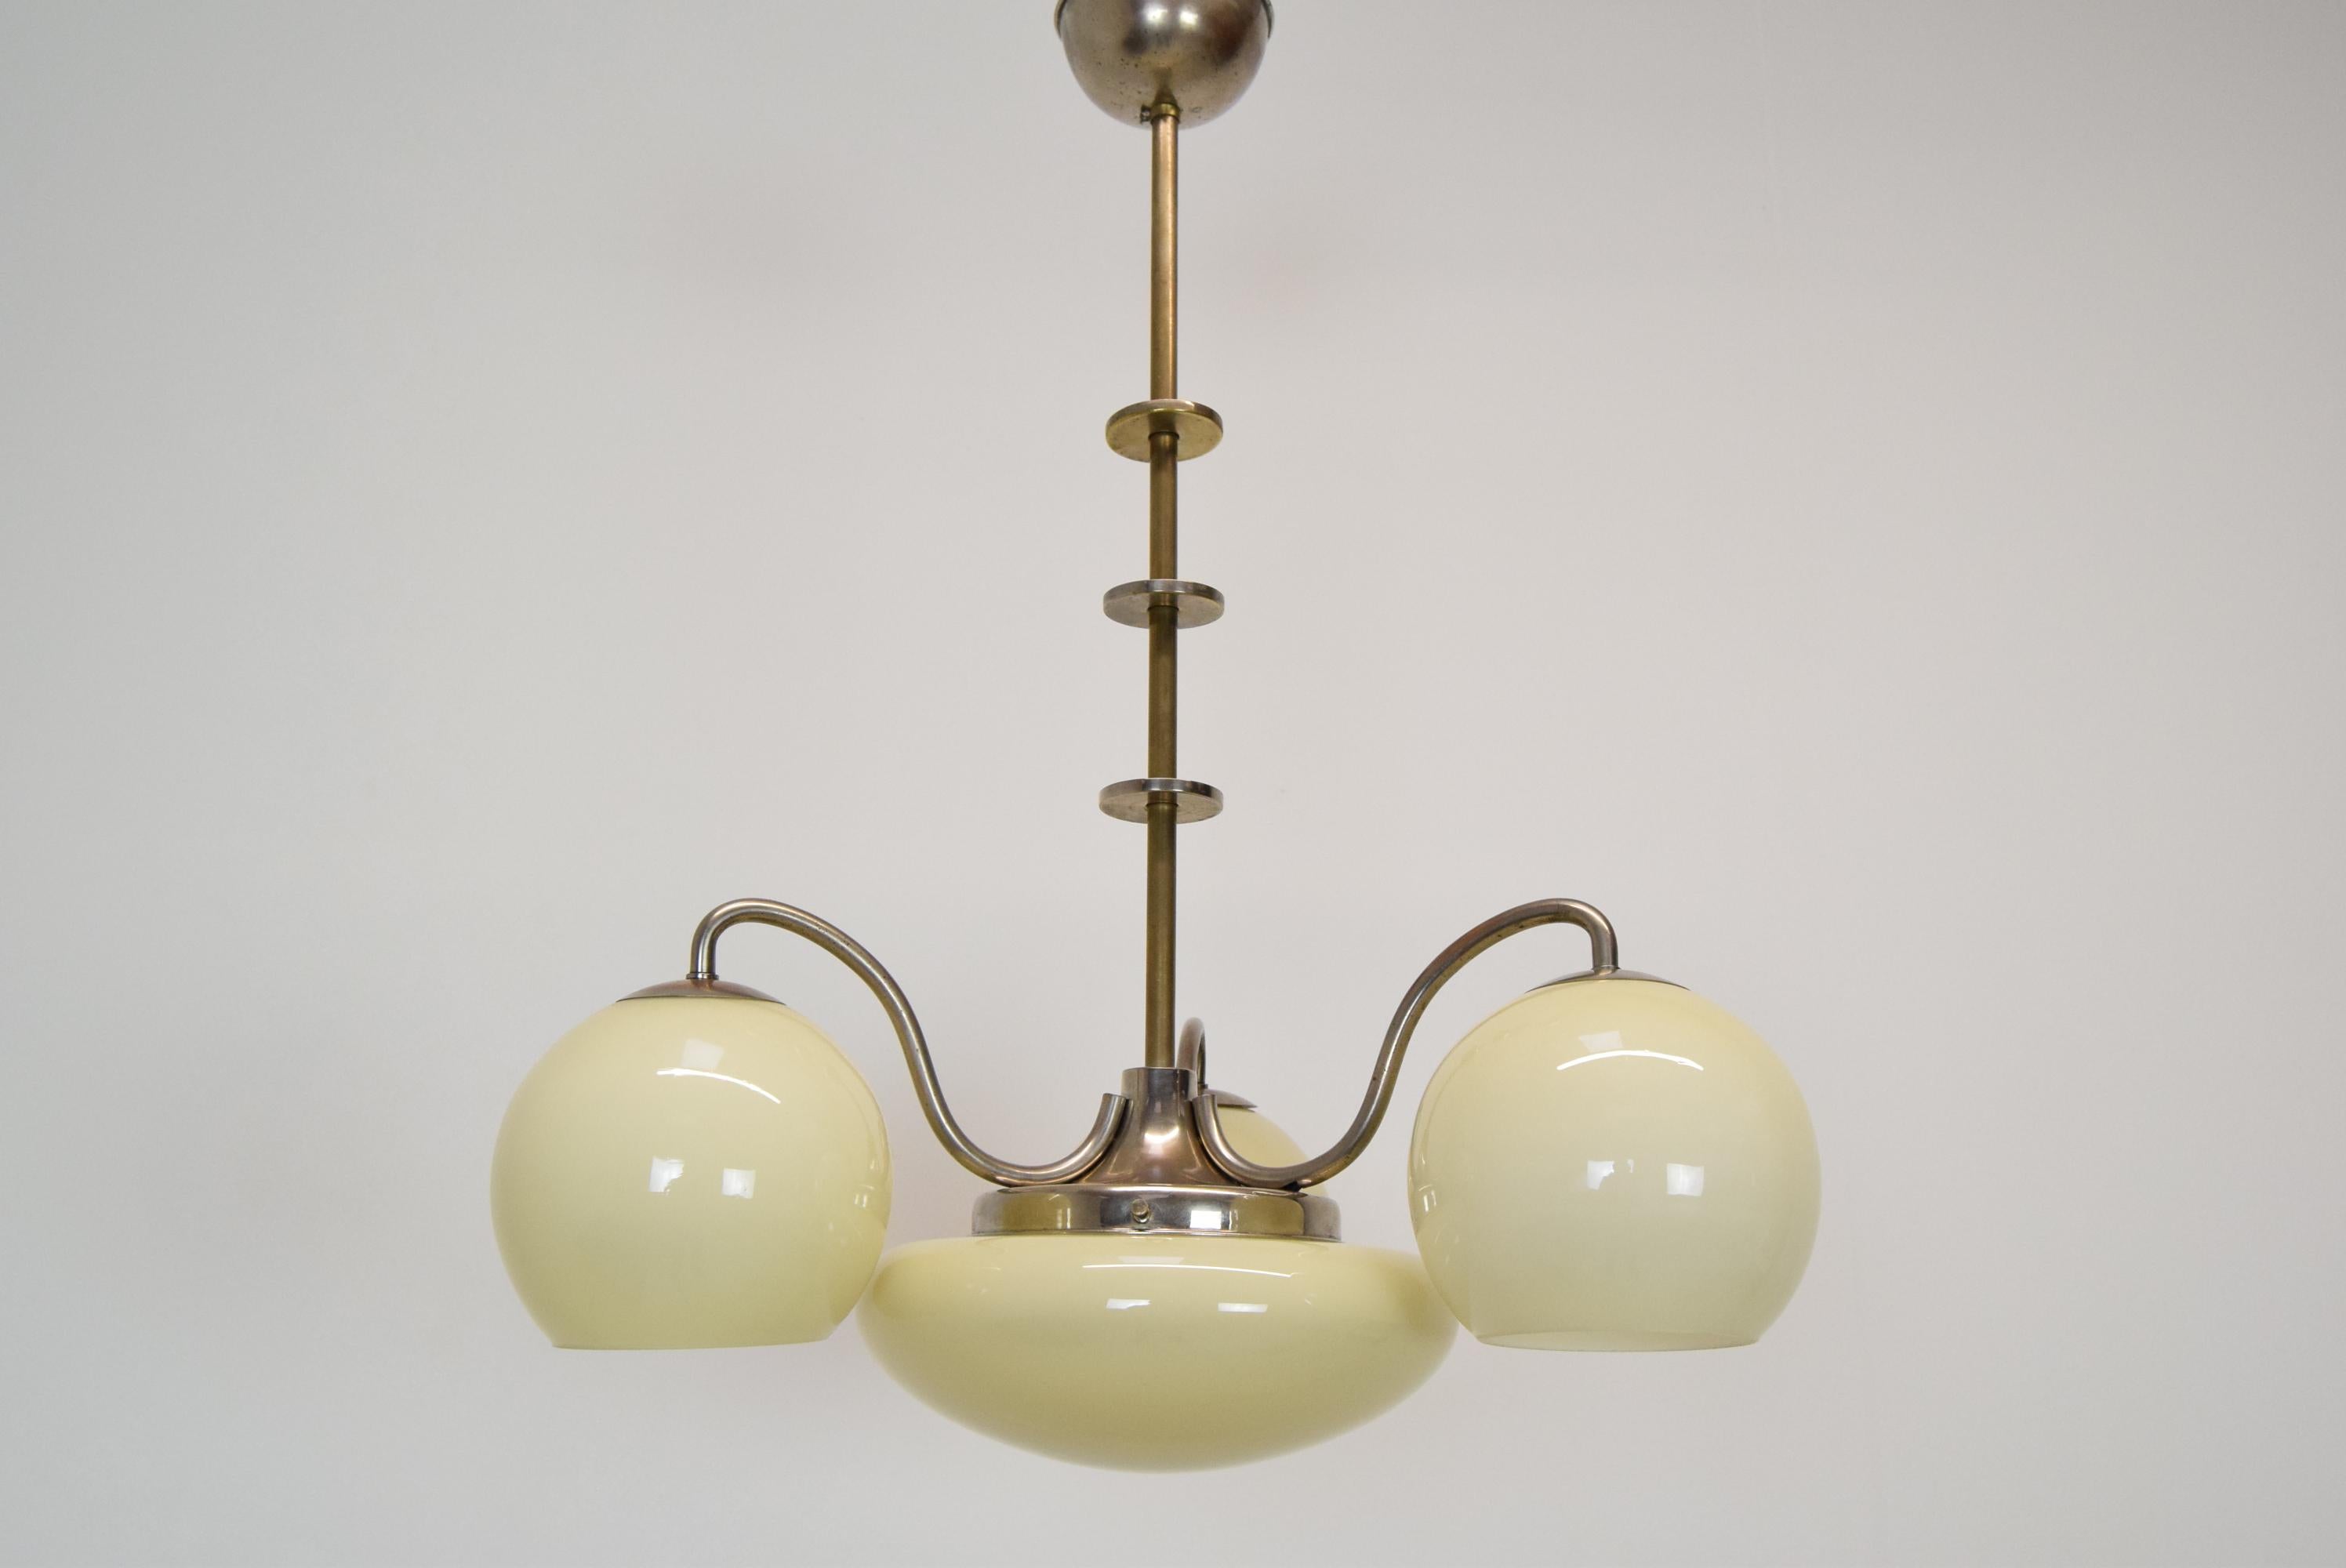 Made in Czechoslovakia.
Made of glass, metal, brass.
Upon request,we can shorten the height of the chandelier.
The chandelier was completely disassembled and cleaned.
The chandelier has new wiring.
US wiring compatible.
4xE27 or E26 bulb
With